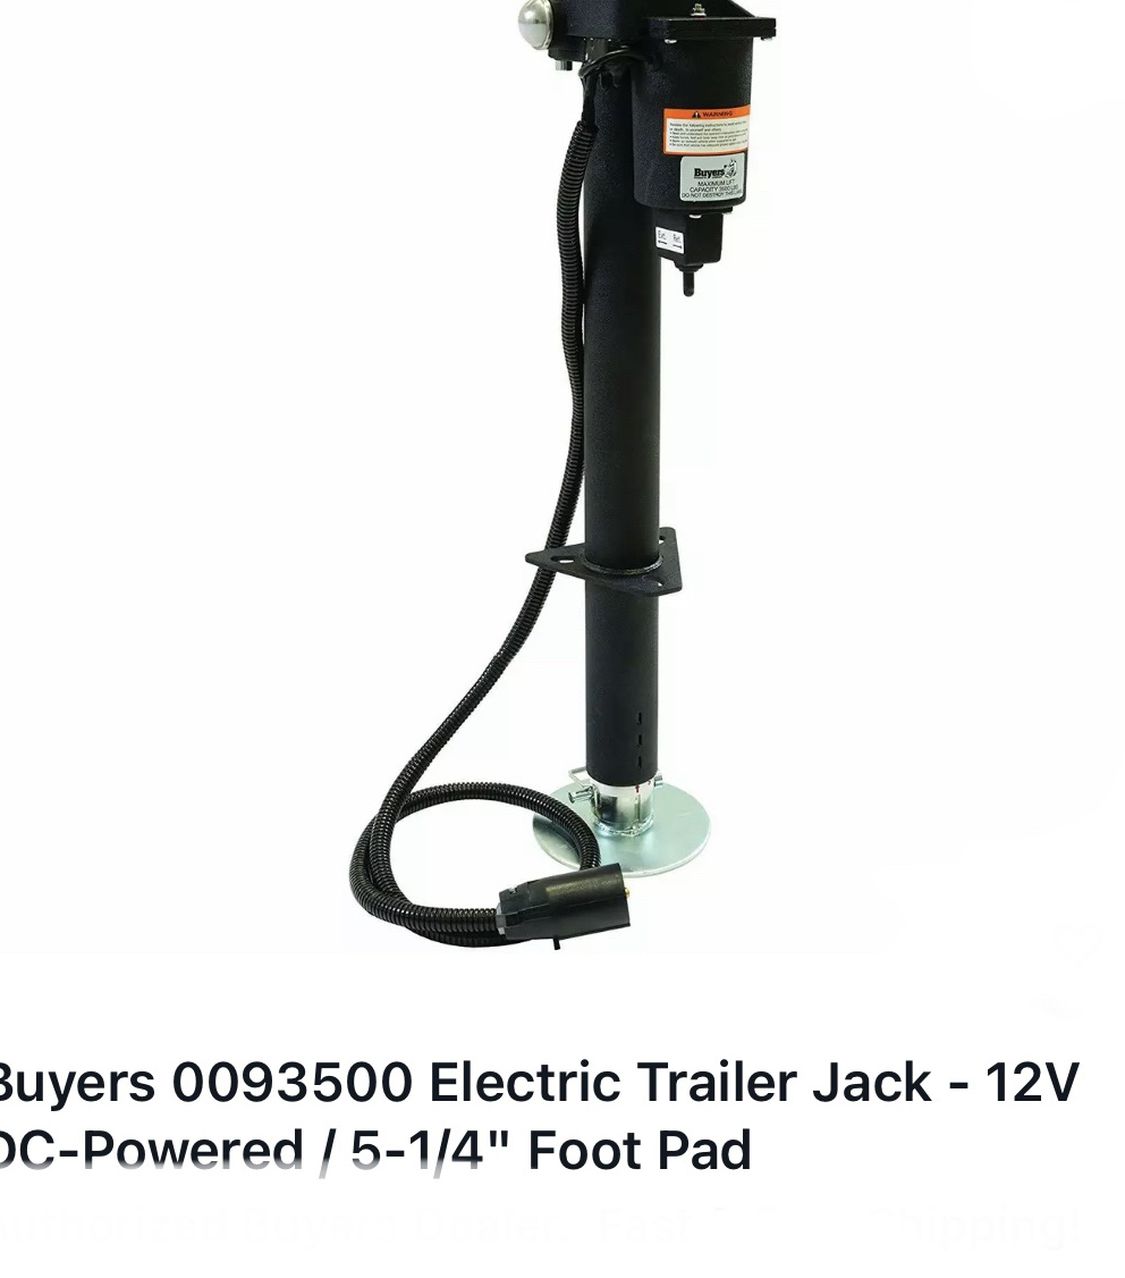 Buyers 0093500 Electric Trailer Jack - 12V DC-Powered / 5-1/4" Foot Pad